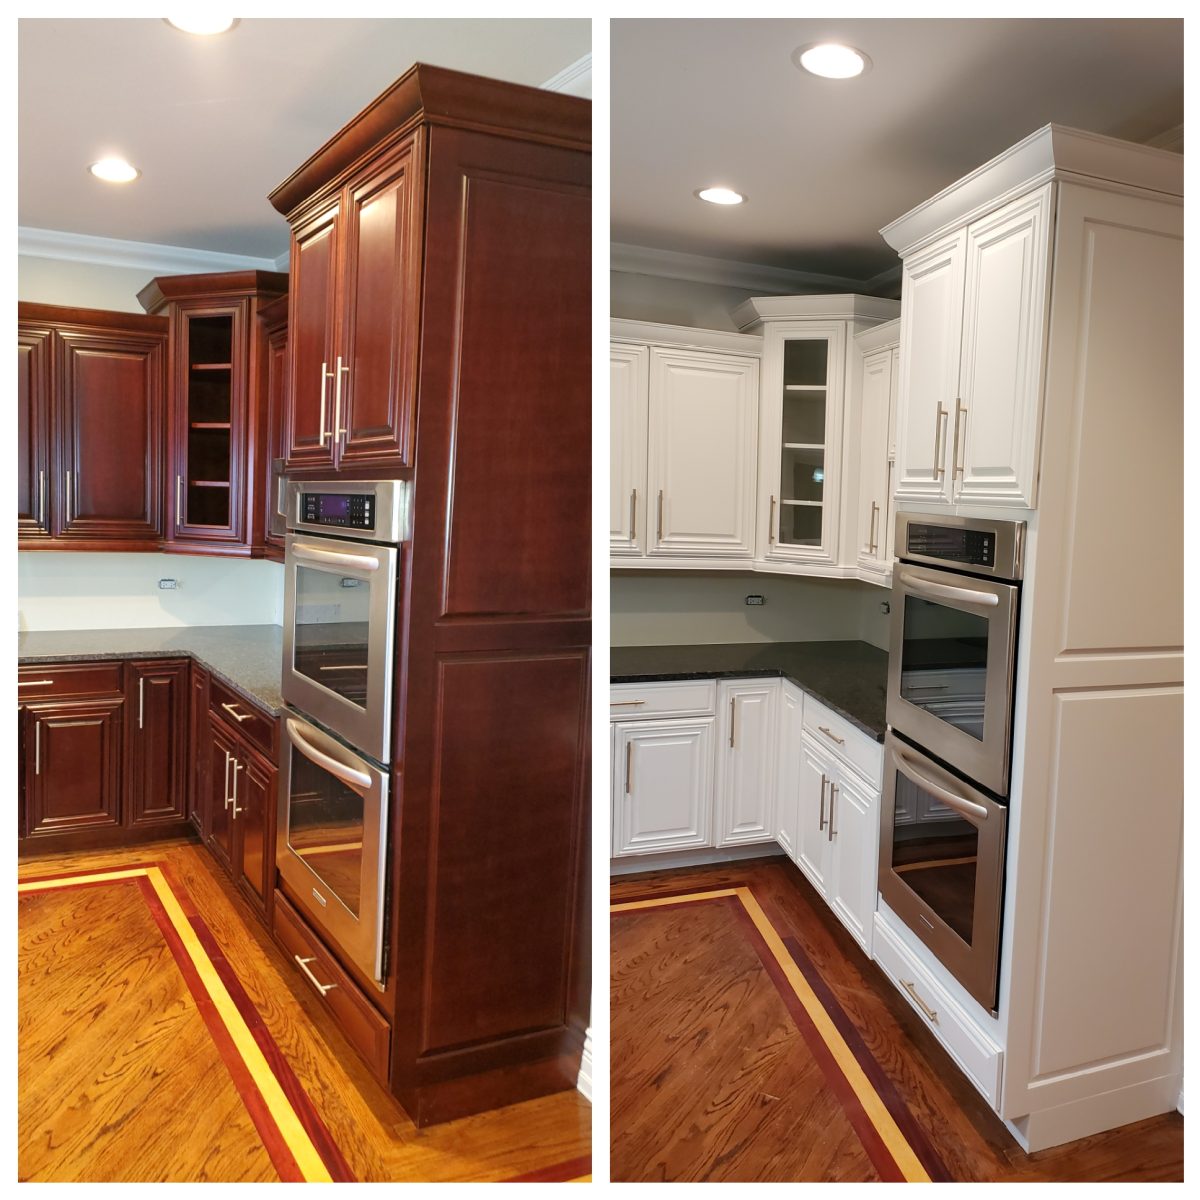 Tips For Painting Cherry Cabinets White, How To Remove Dried Paint From Kitchen Cabinets